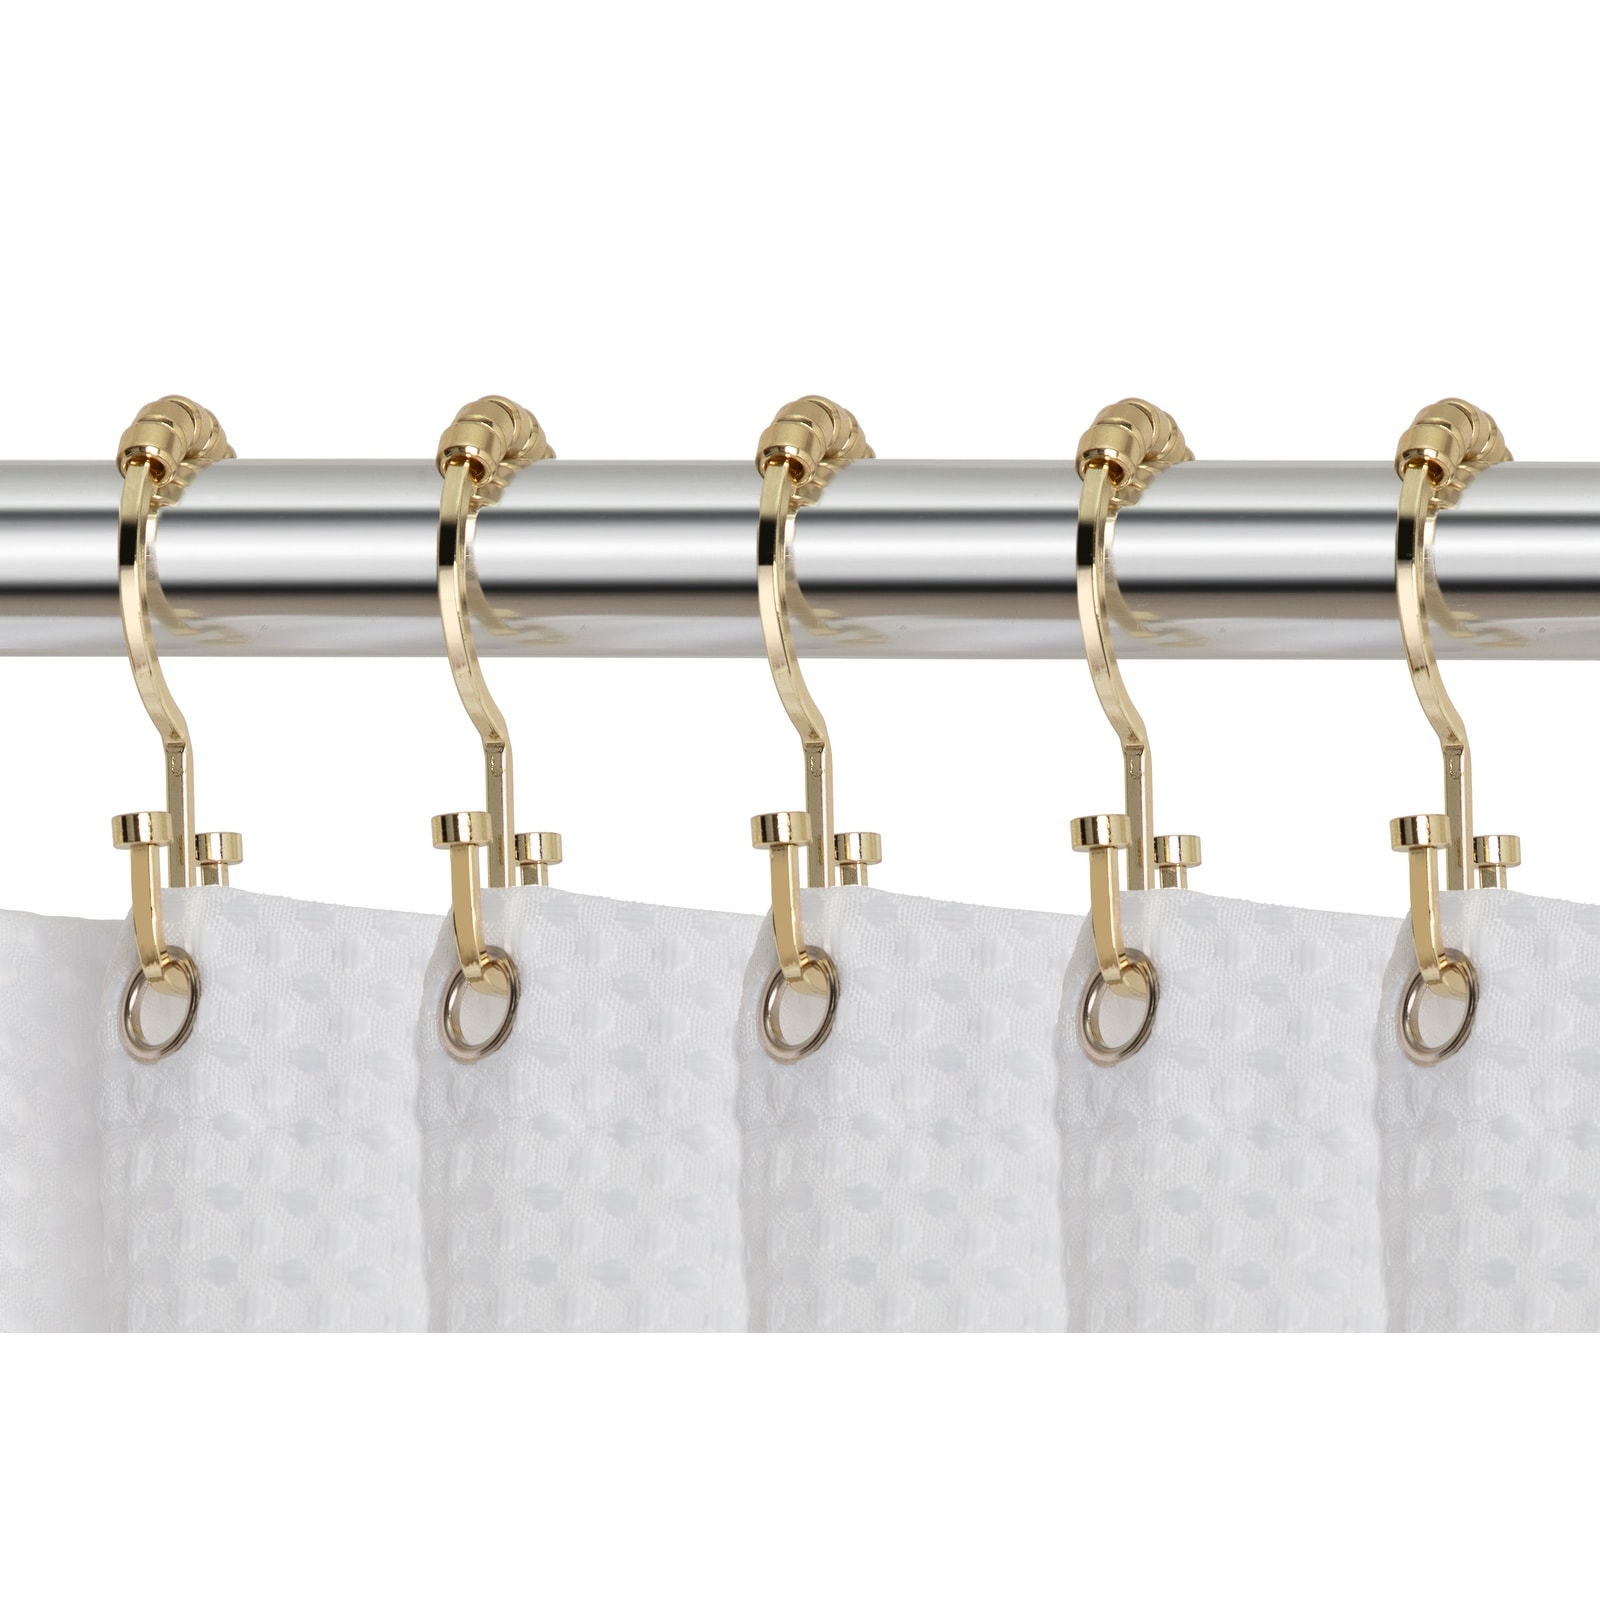 Details about   Set of 12 Bathroom Shower Curtain Hooks Rings Stainless Steel with Roller Balls 